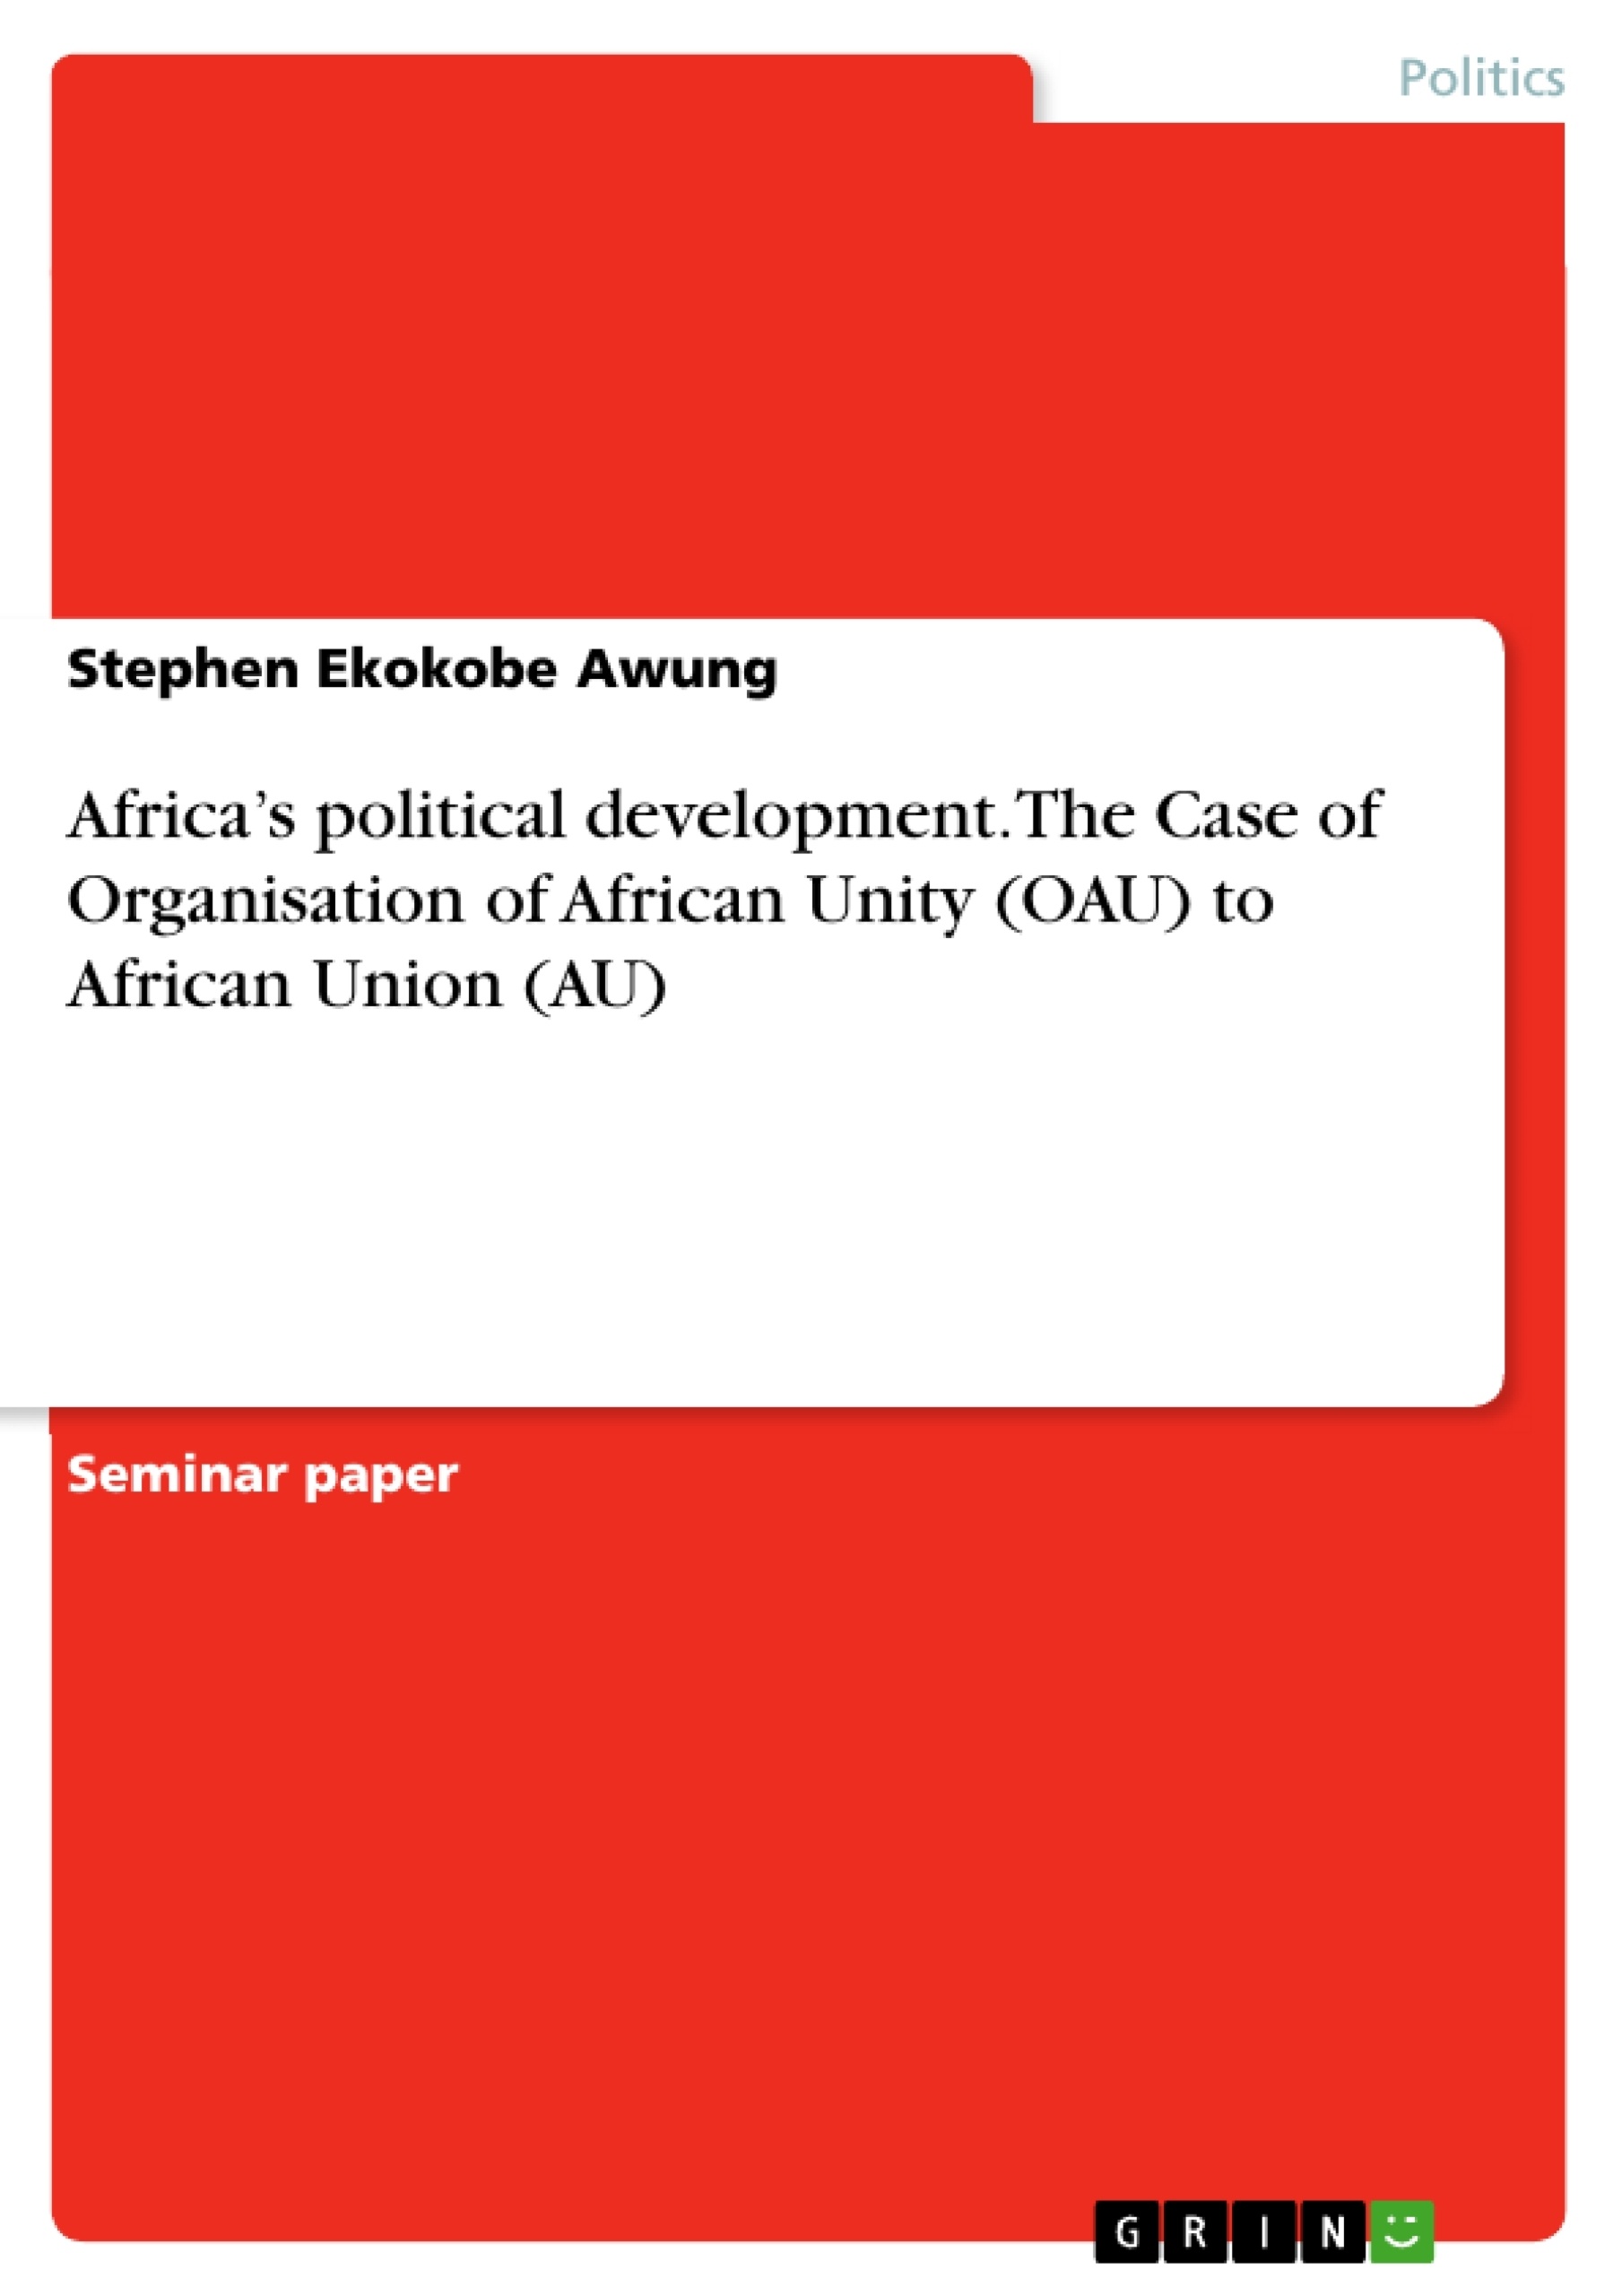 Título: Africa’s political development. The Case of Organisation of African Unity (OAU) to African Union (AU)